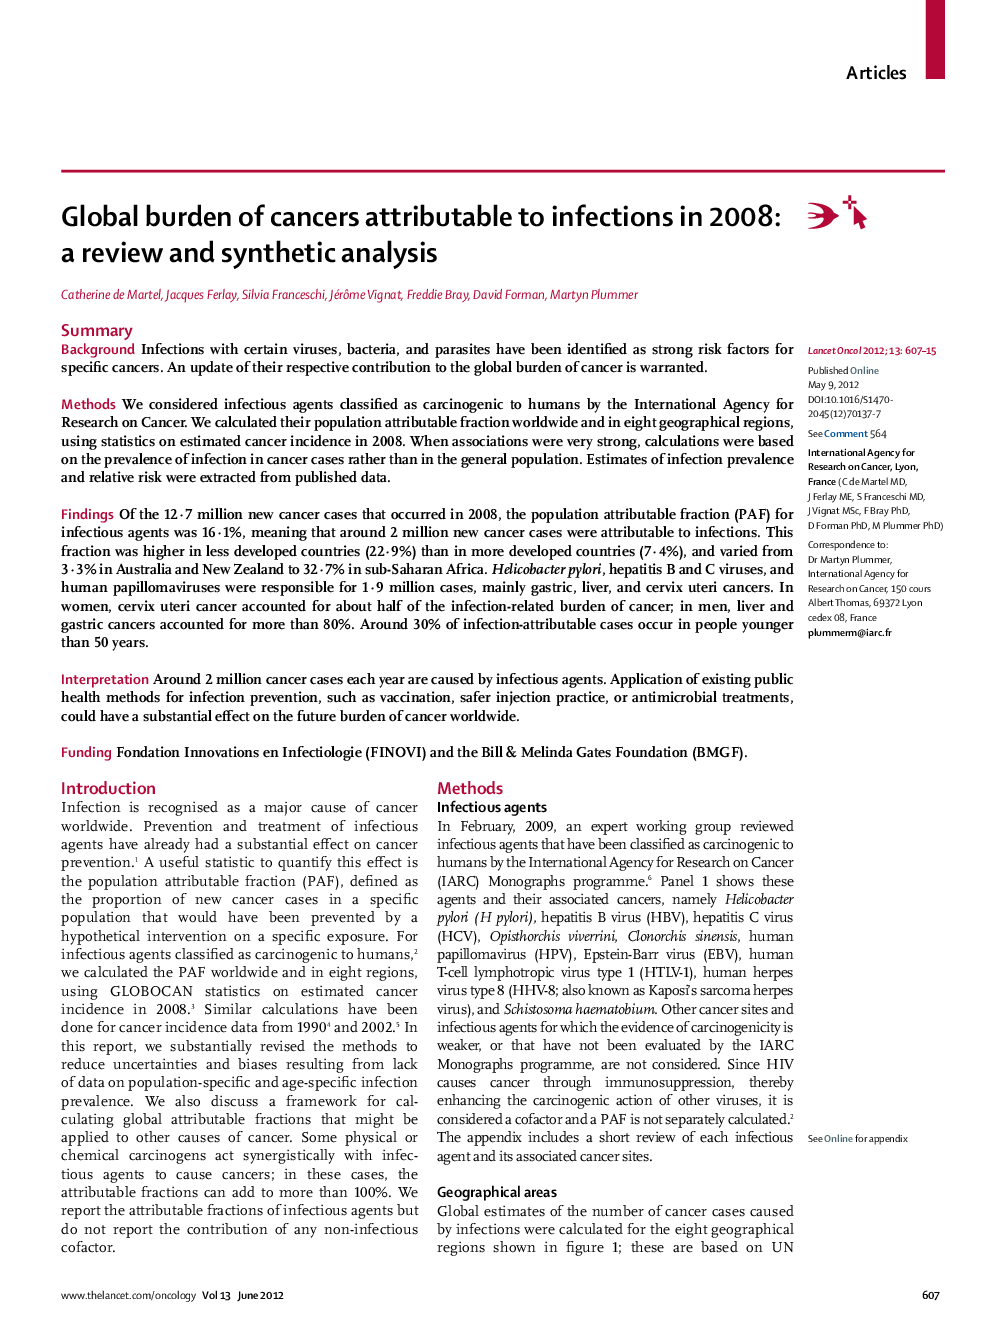 Global burden of cancers attributable to infections in 2008: a review and synthetic analysis